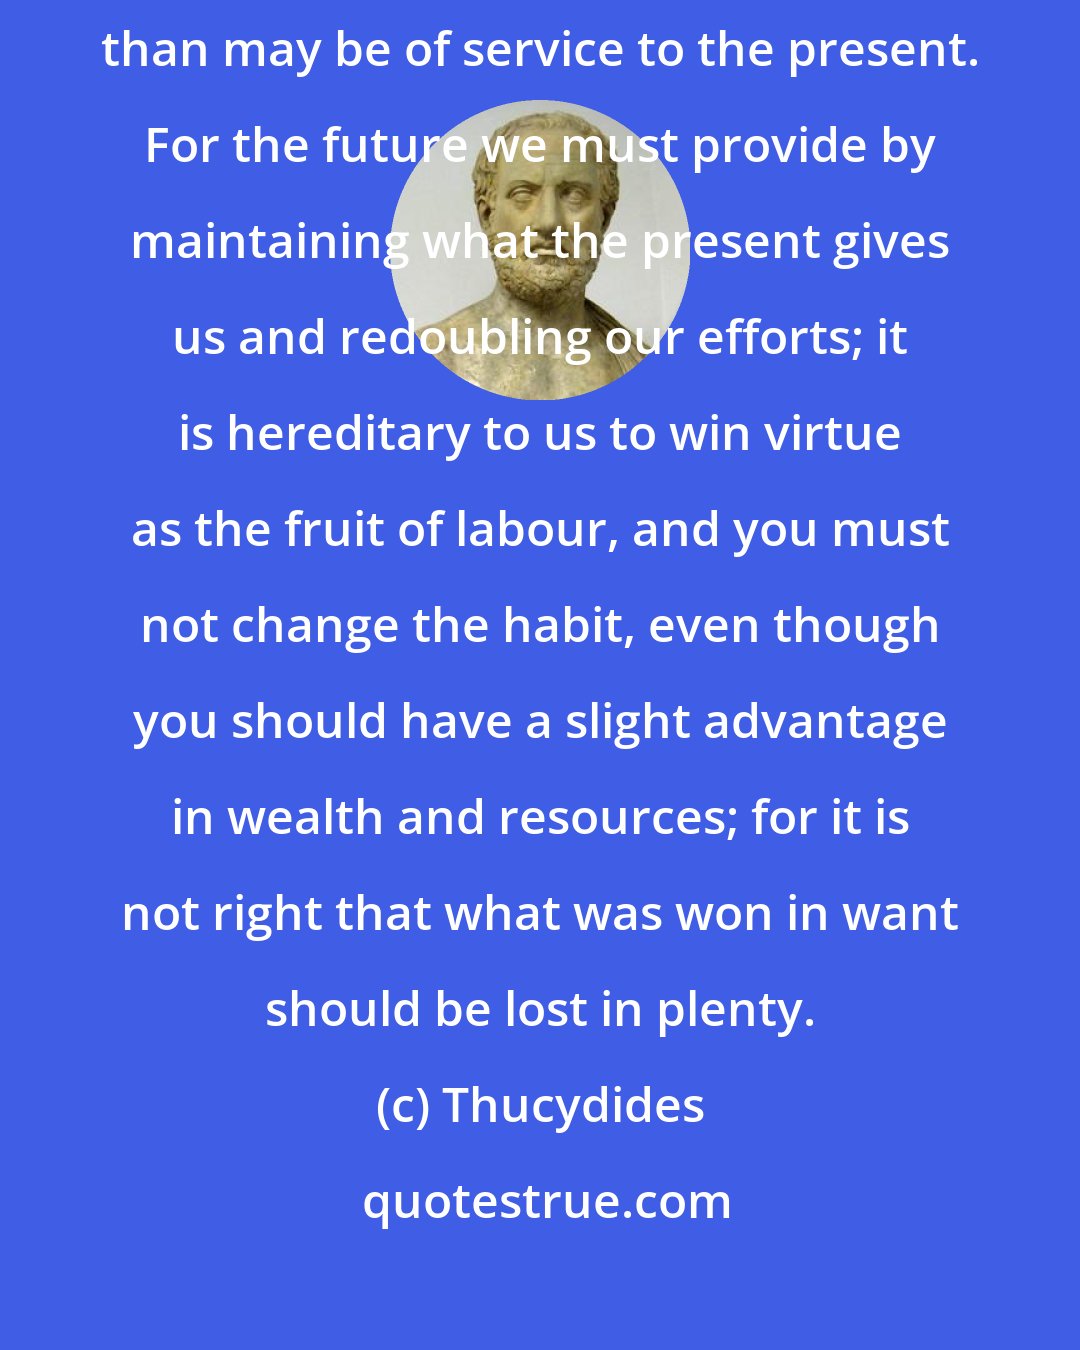 Thucydides: There is, however, no advantage in reflections on the past further than may be of service to the present. For the future we must provide by maintaining what the present gives us and redoubling our efforts; it is hereditary to us to win virtue as the fruit of labour, and you must not change the habit, even though you should have a slight advantage in wealth and resources; for it is not right that what was won in want should be lost in plenty.